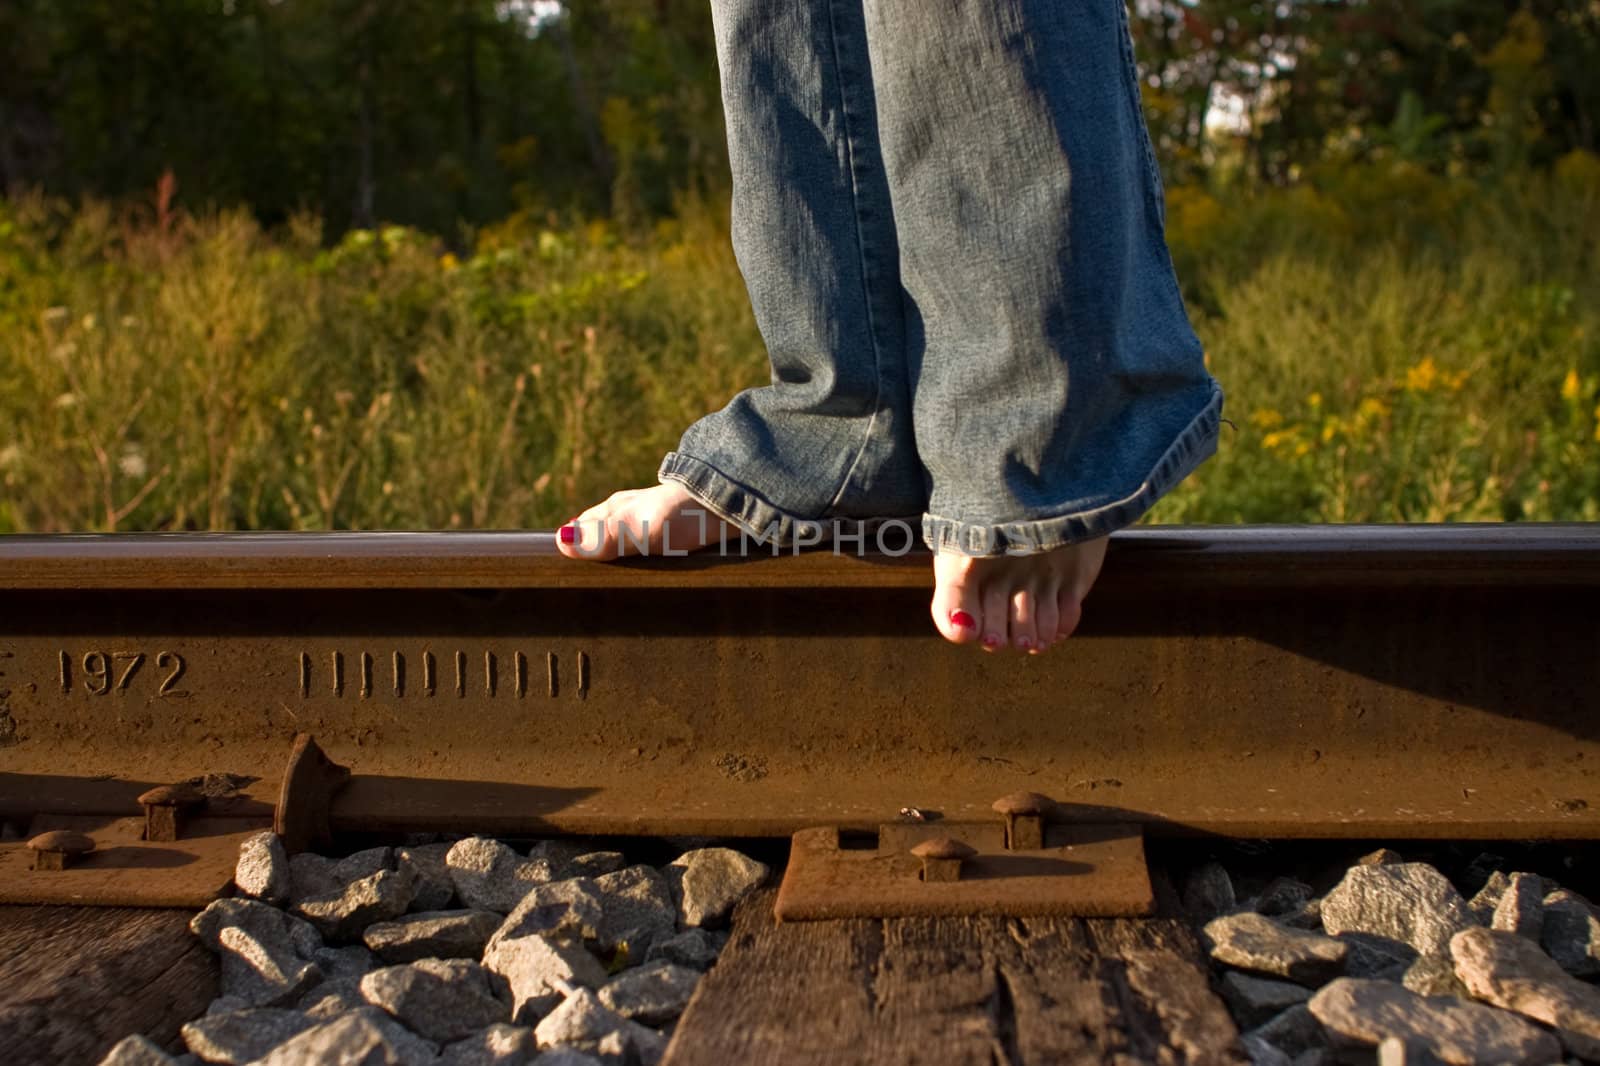 Tip-toeing along the train tracks